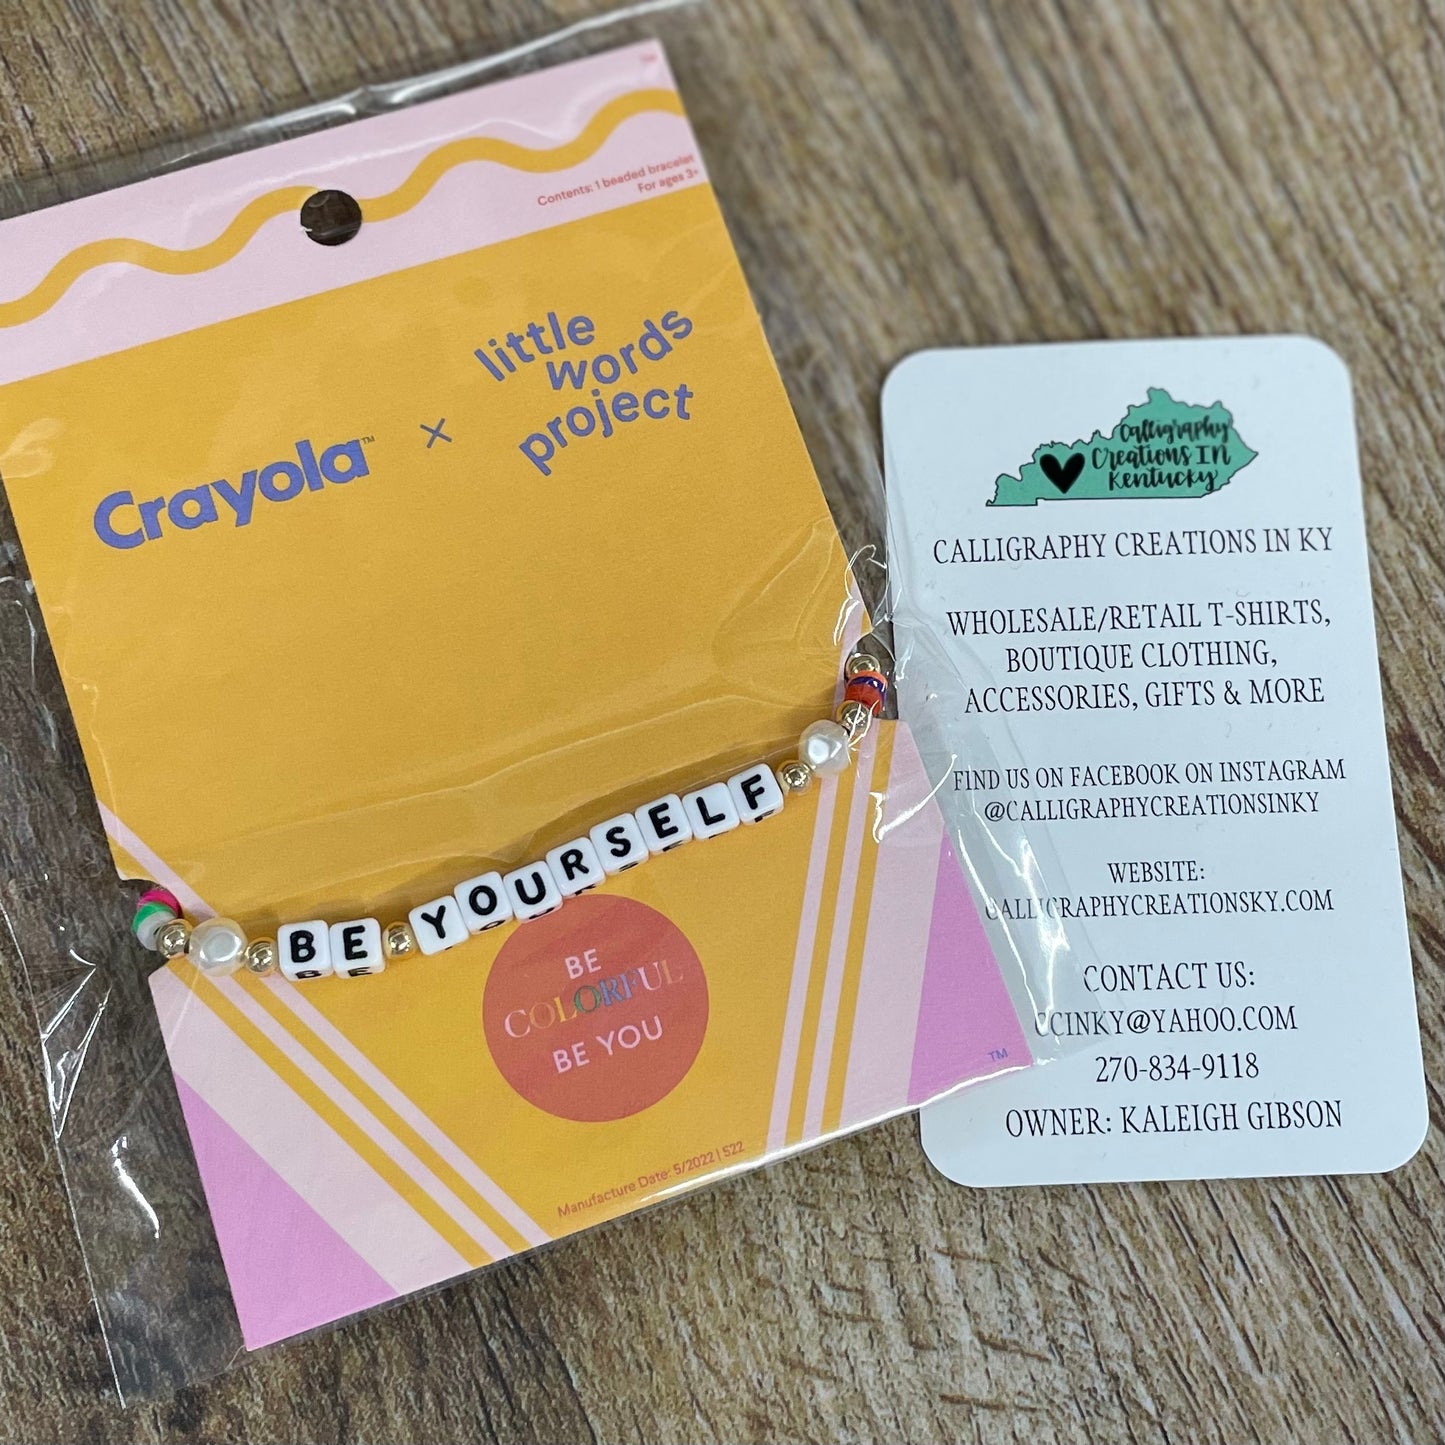 Be Yourself / Crayola X Little Words Project Beaded Bracelet